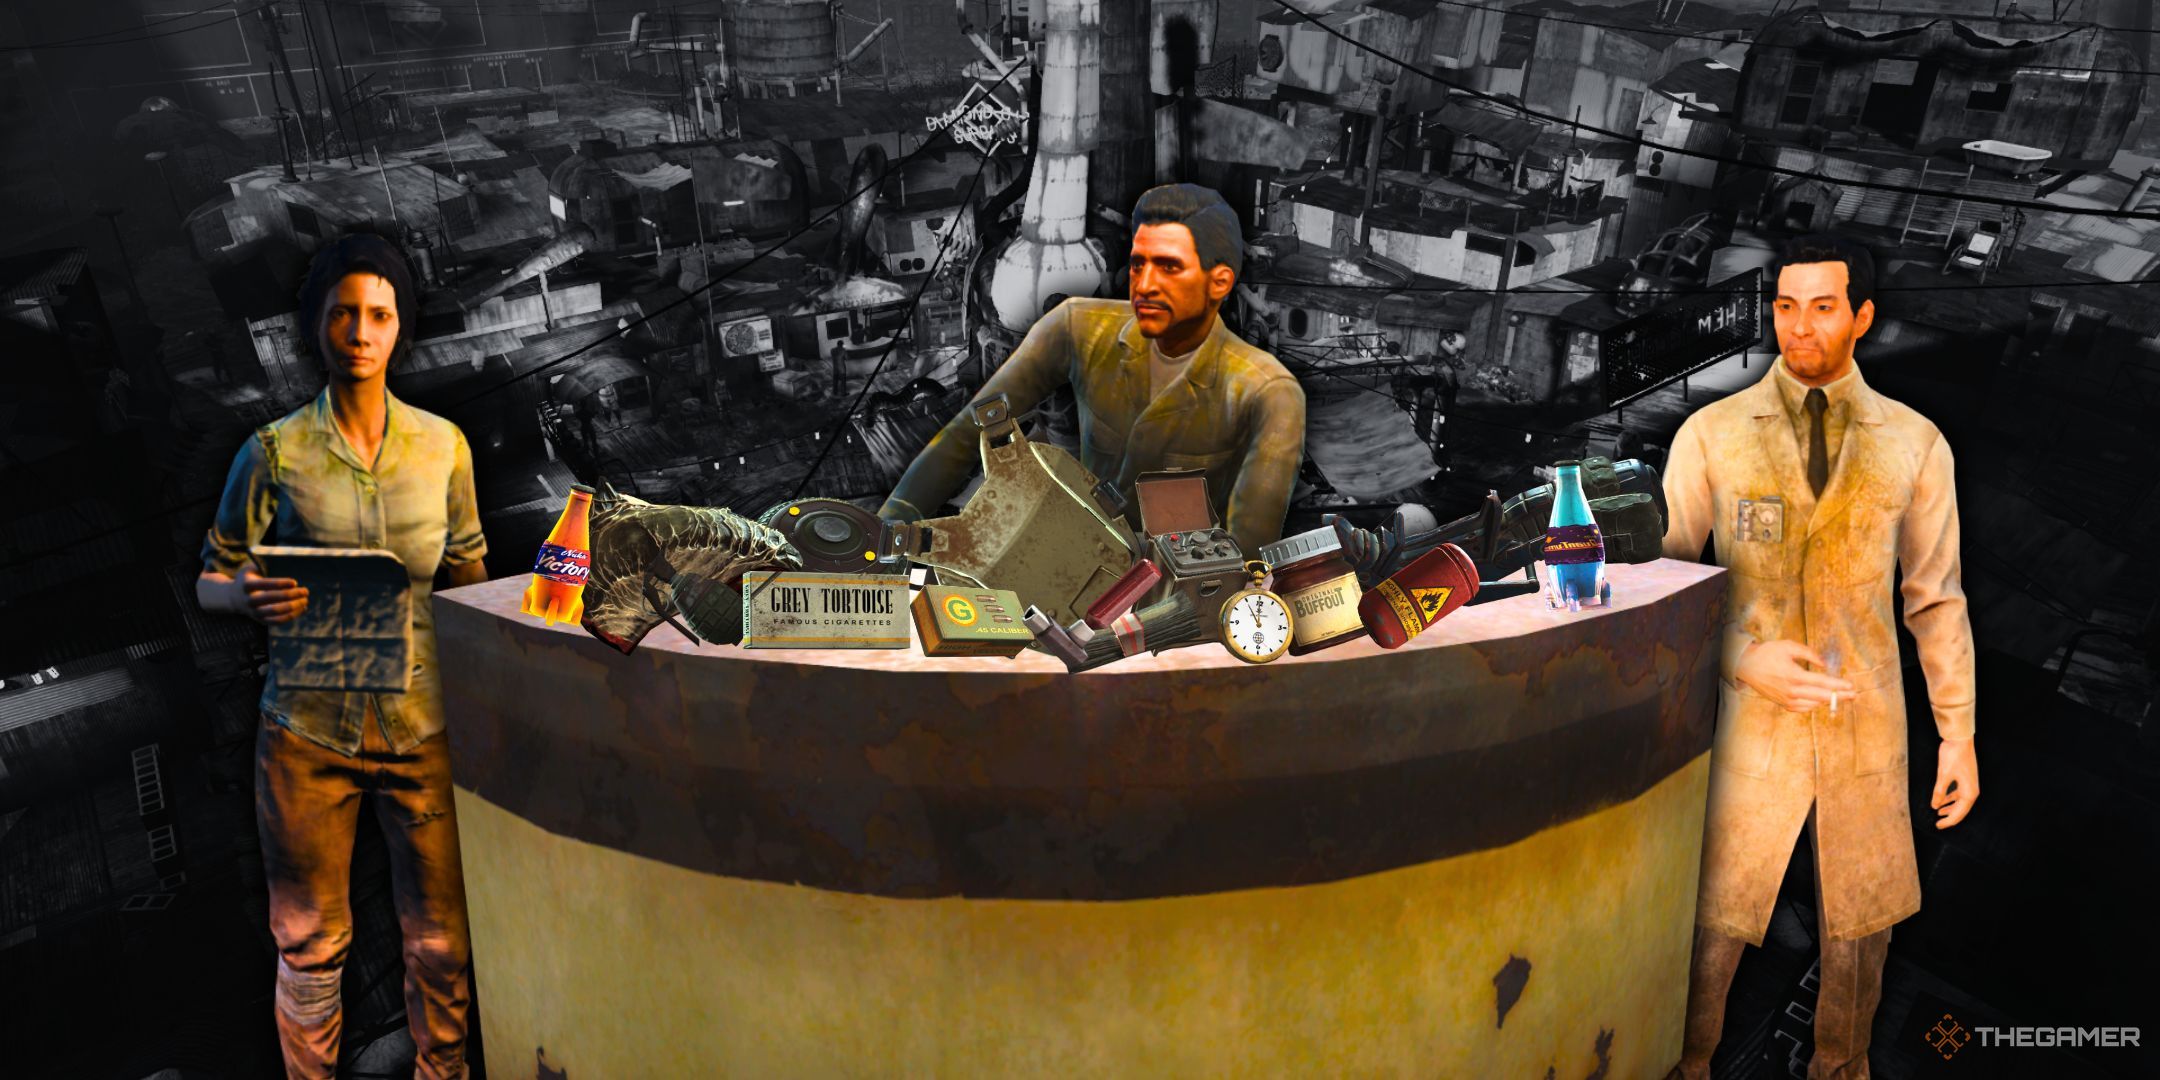 Three different vendors are seen around a damaged desk with junk, money, armor, food, drinks, and other items on it.